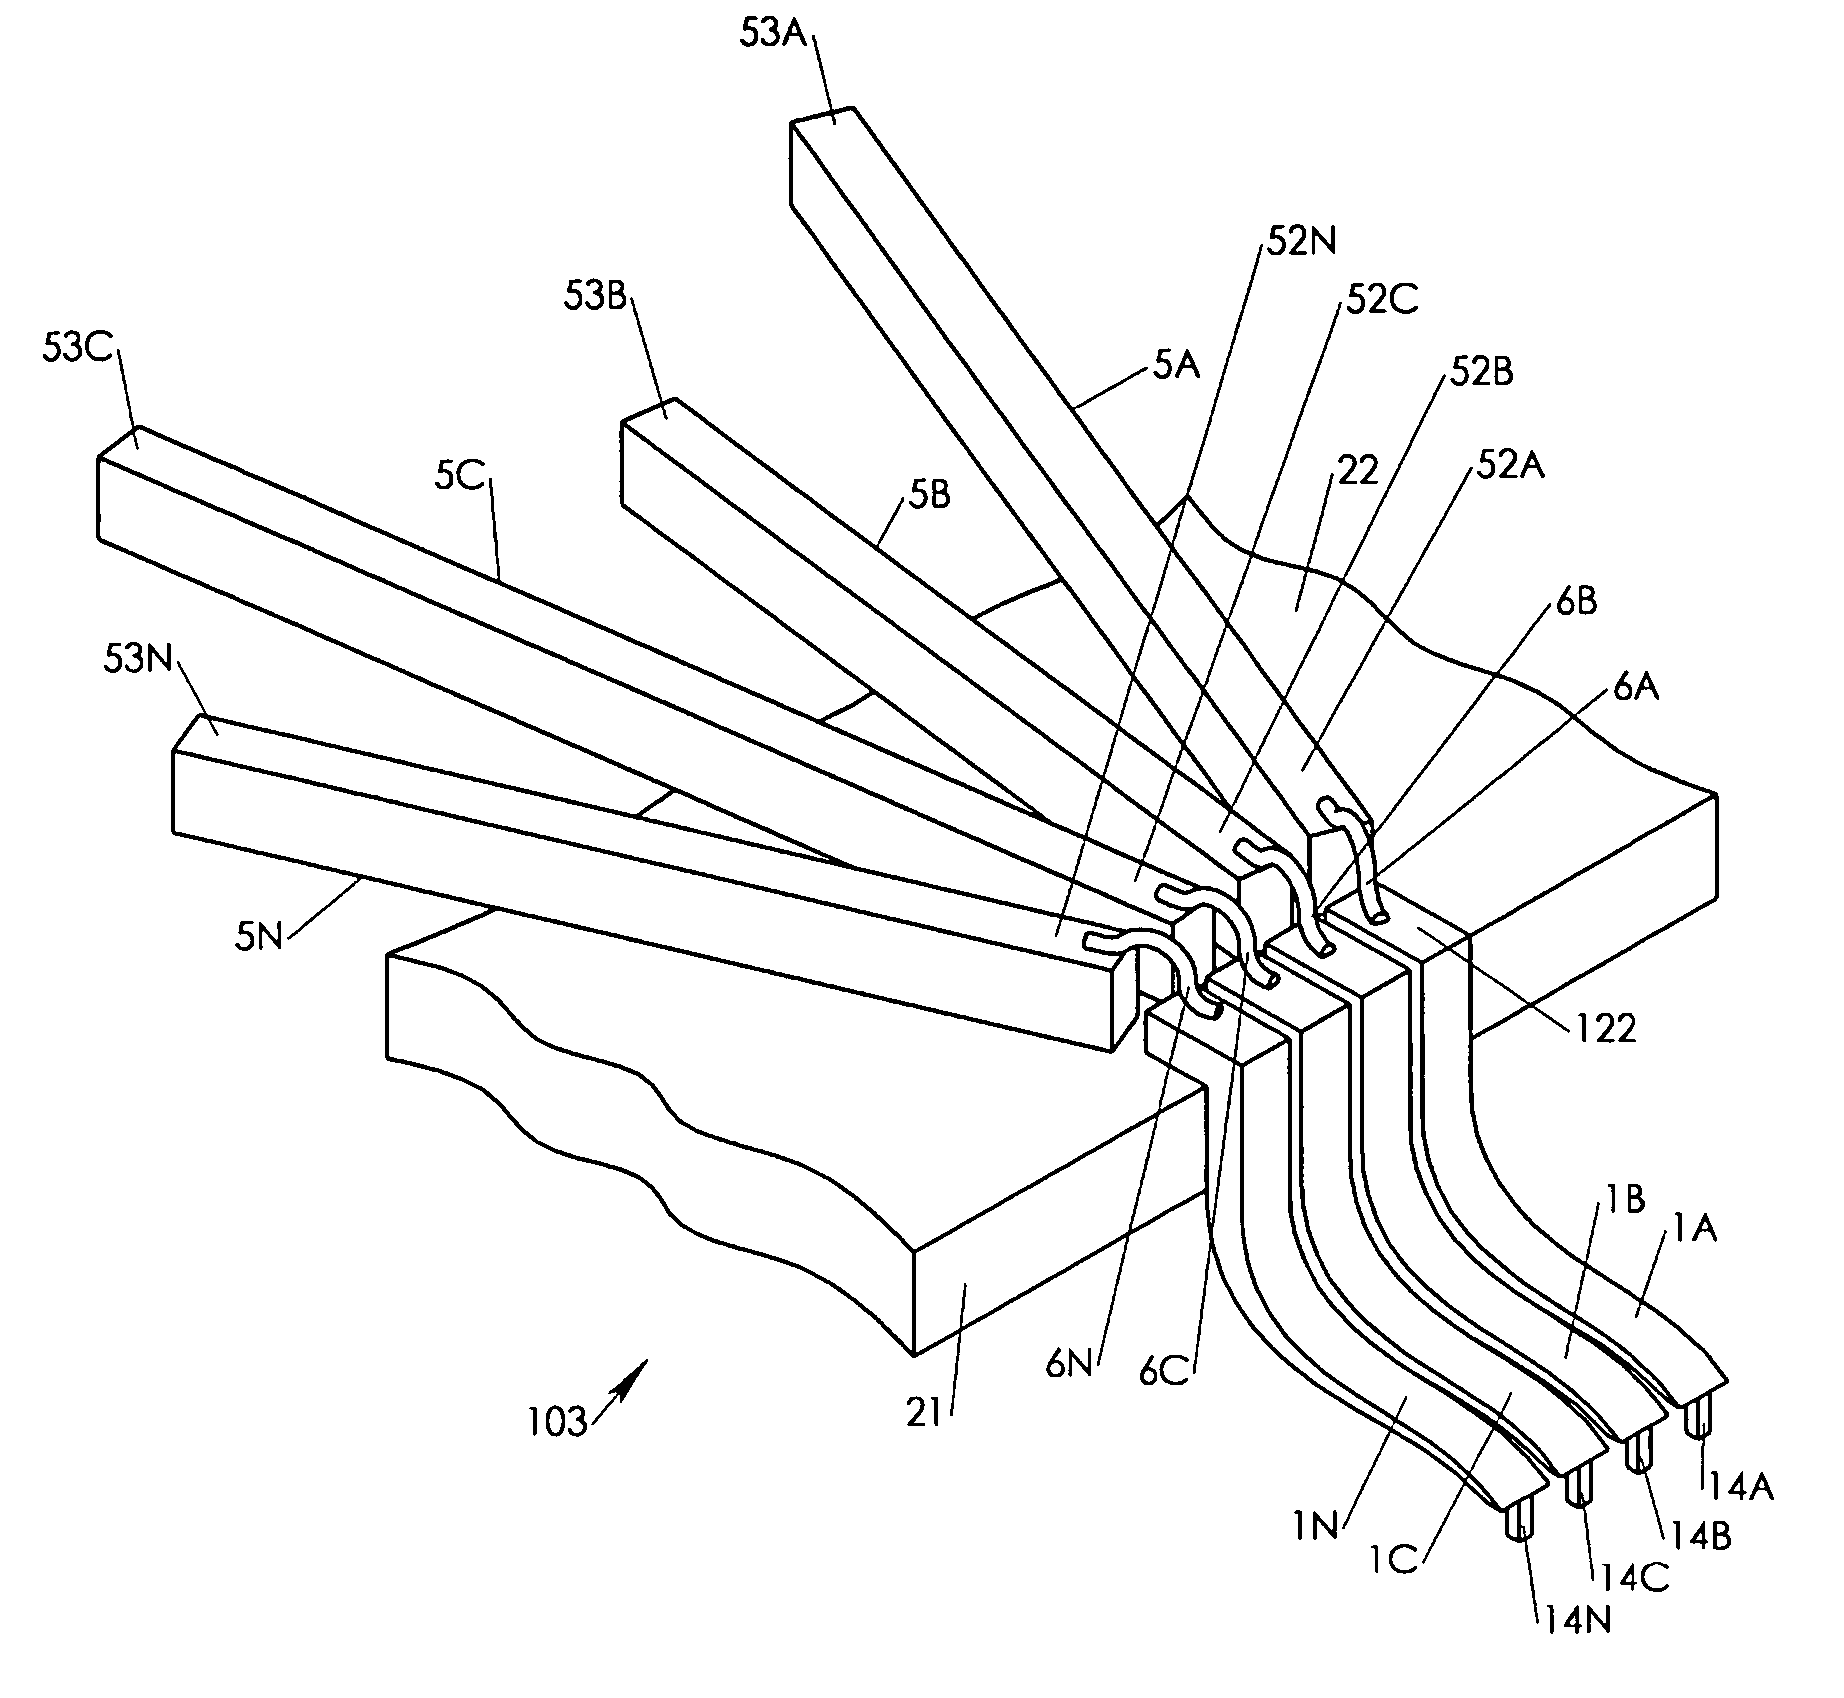 Cantilever probe with dual plane fixture and probe apparatus therewith